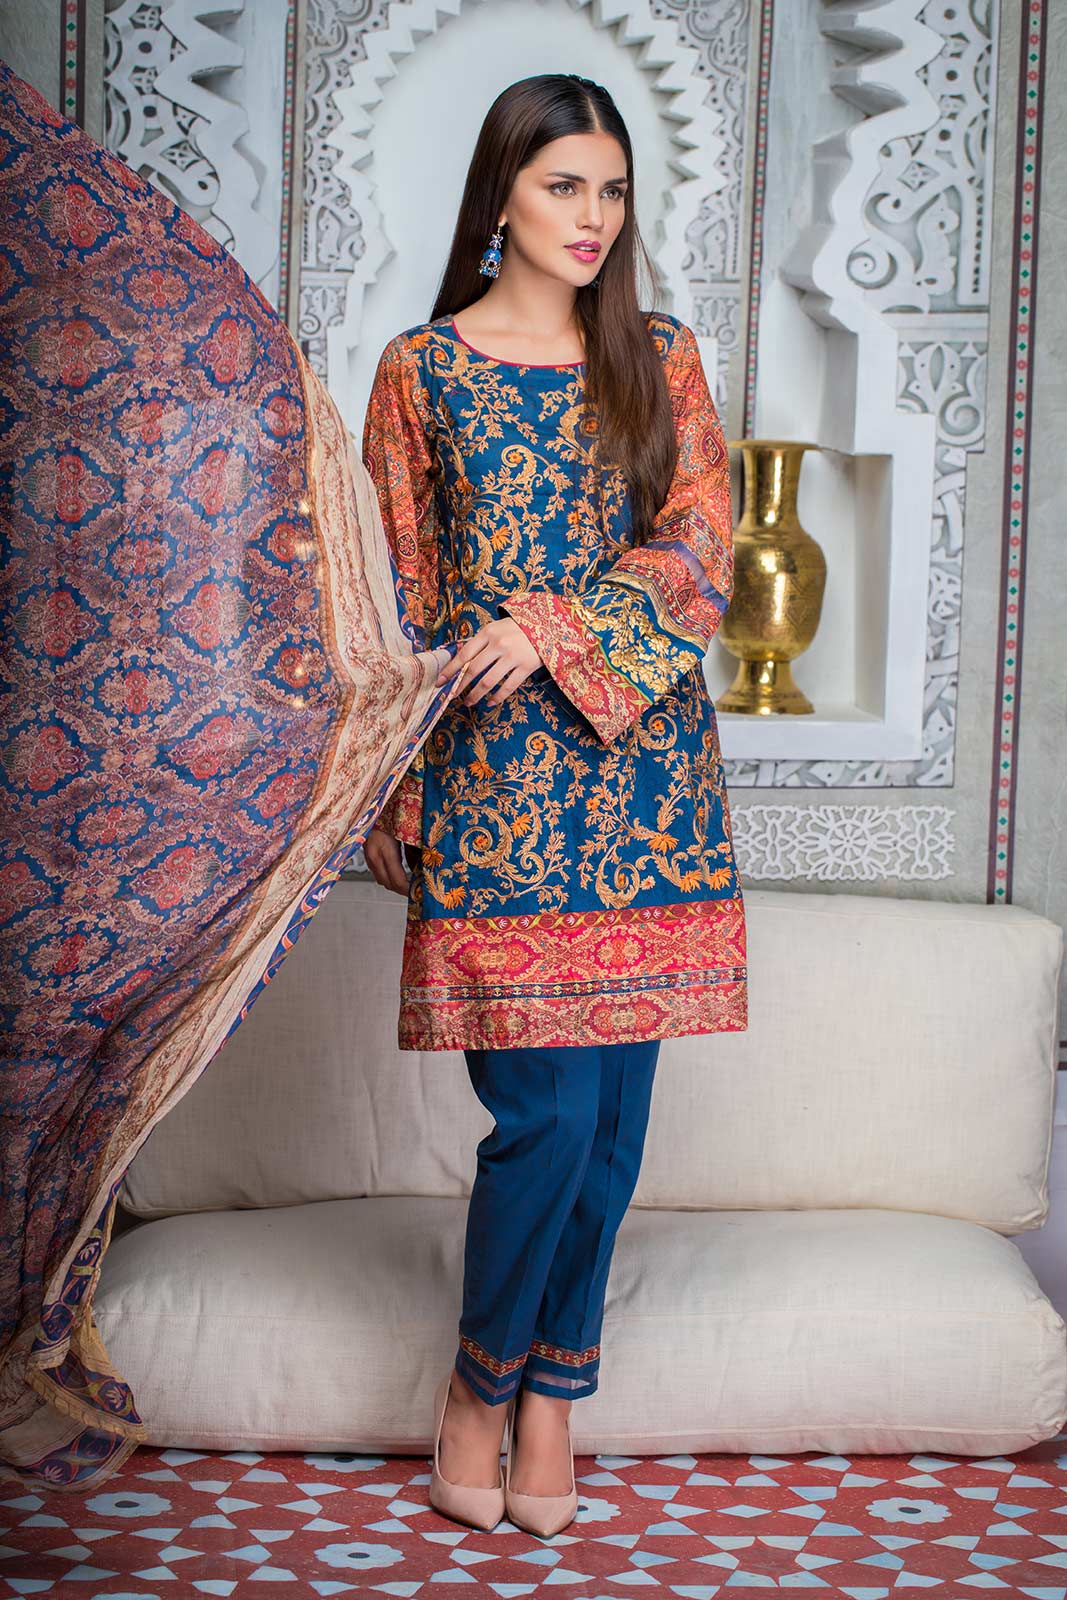 Buy this lawn pret wear stitched dress at a best price of available for online shopping by Bonanza Eid Clothes in New york